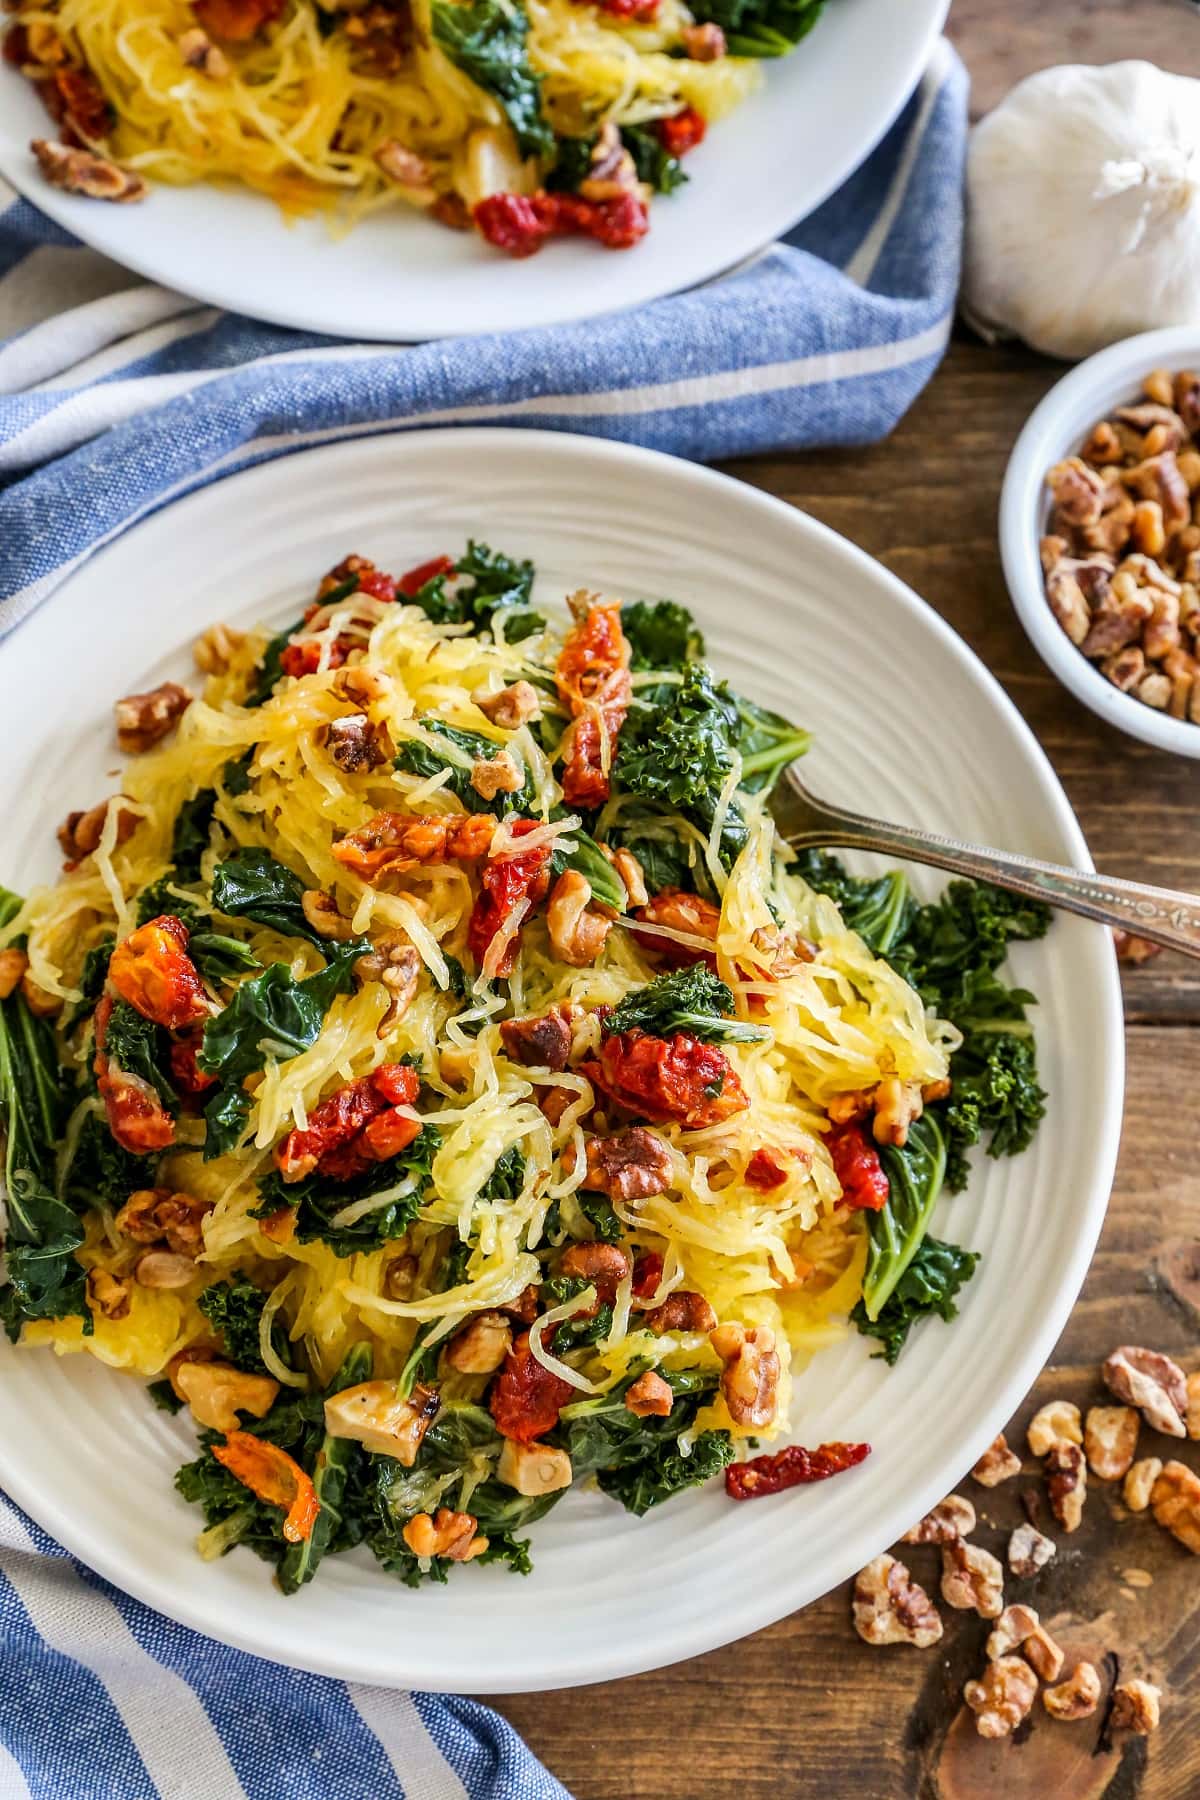 Roasted Garlic and Kale Spaghetti Squash with sun-dried tomatoes and walnuts - a nutritious meatless weeknight meal #vegan #paleo #glutenfree